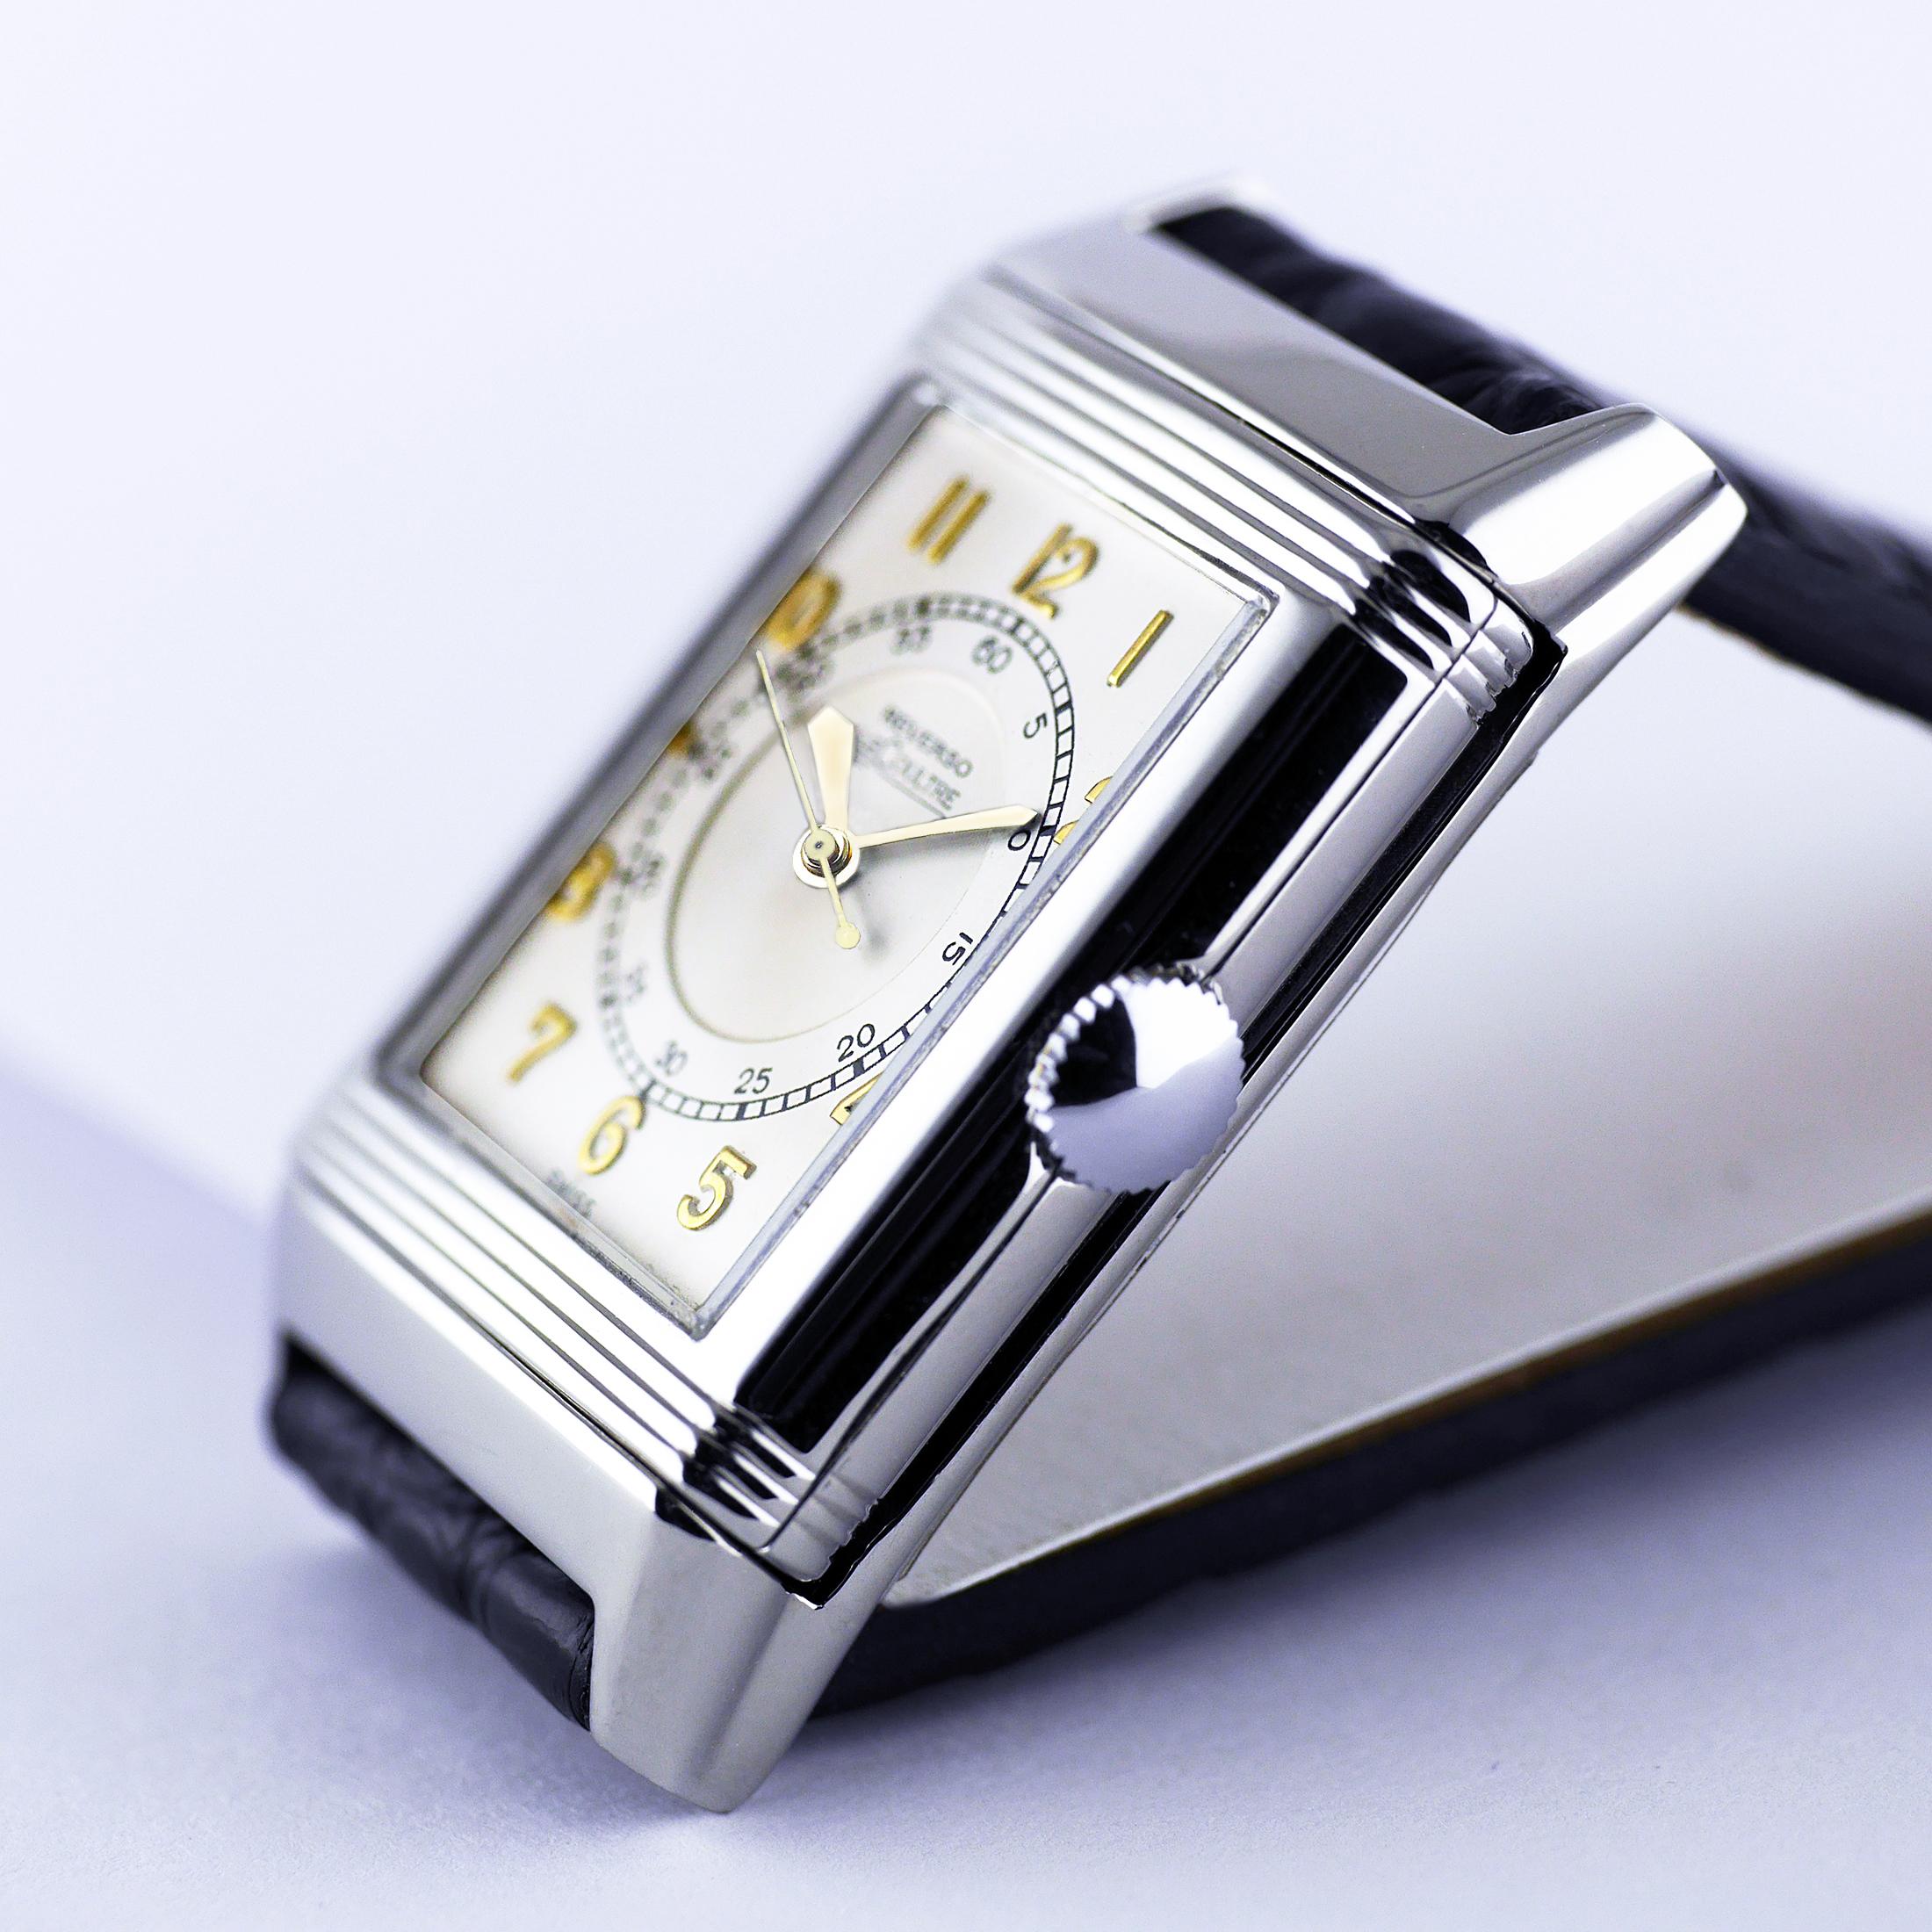 Le Coultre Reverso, Art Deco, Stainless Steel Wristwatch, circa 1934 ...